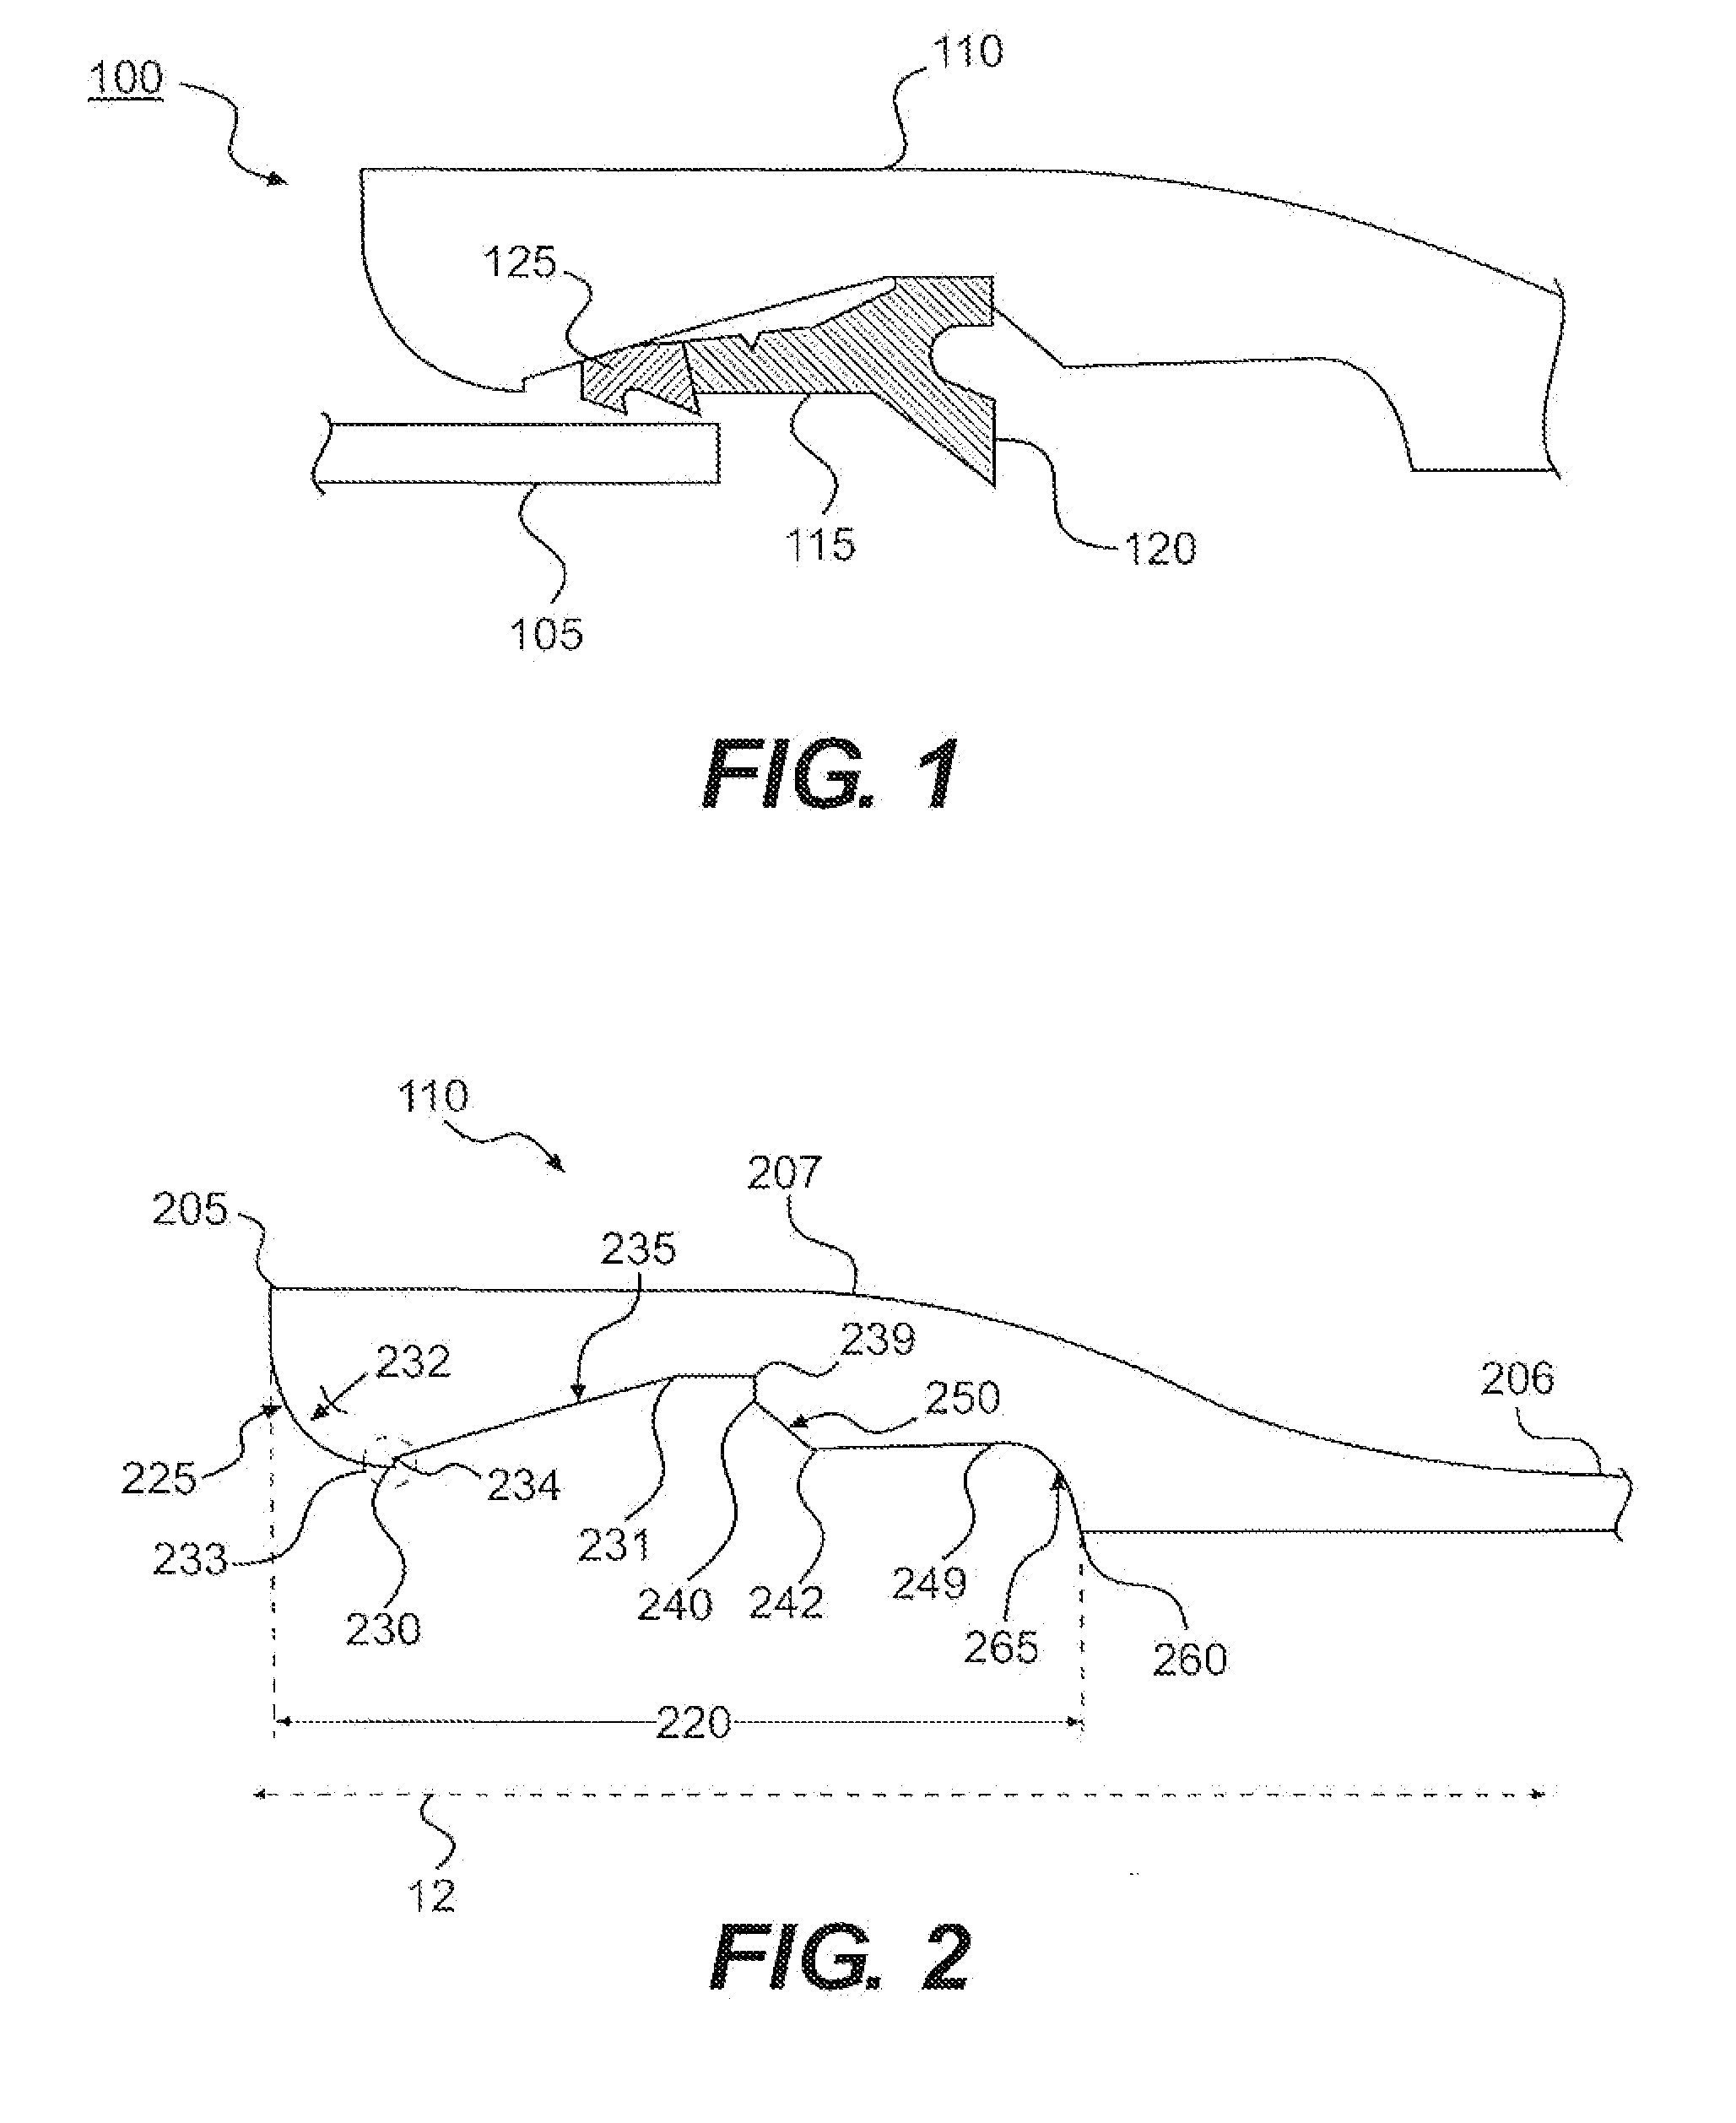 Simplified low insertion force sealing device capable of self restraint and joint deflection